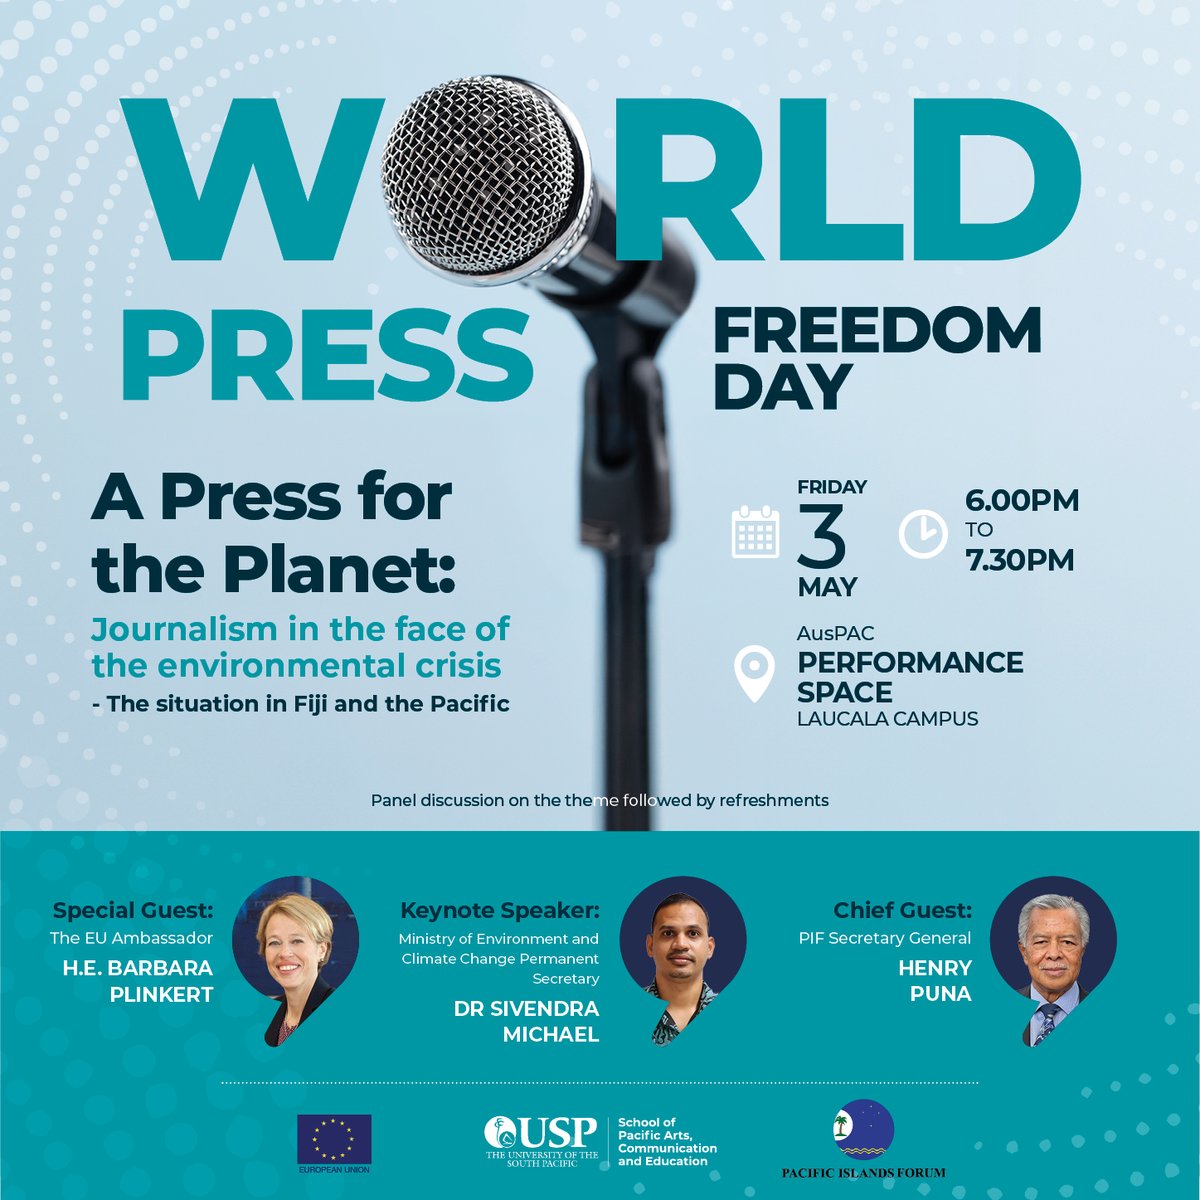 The European Union remains steadfast in its commitment to protect media freedom and pluralism across the world. Join us today at @UniSouthPacific as we celebrate #WorldPressFreedomDay in Suva.